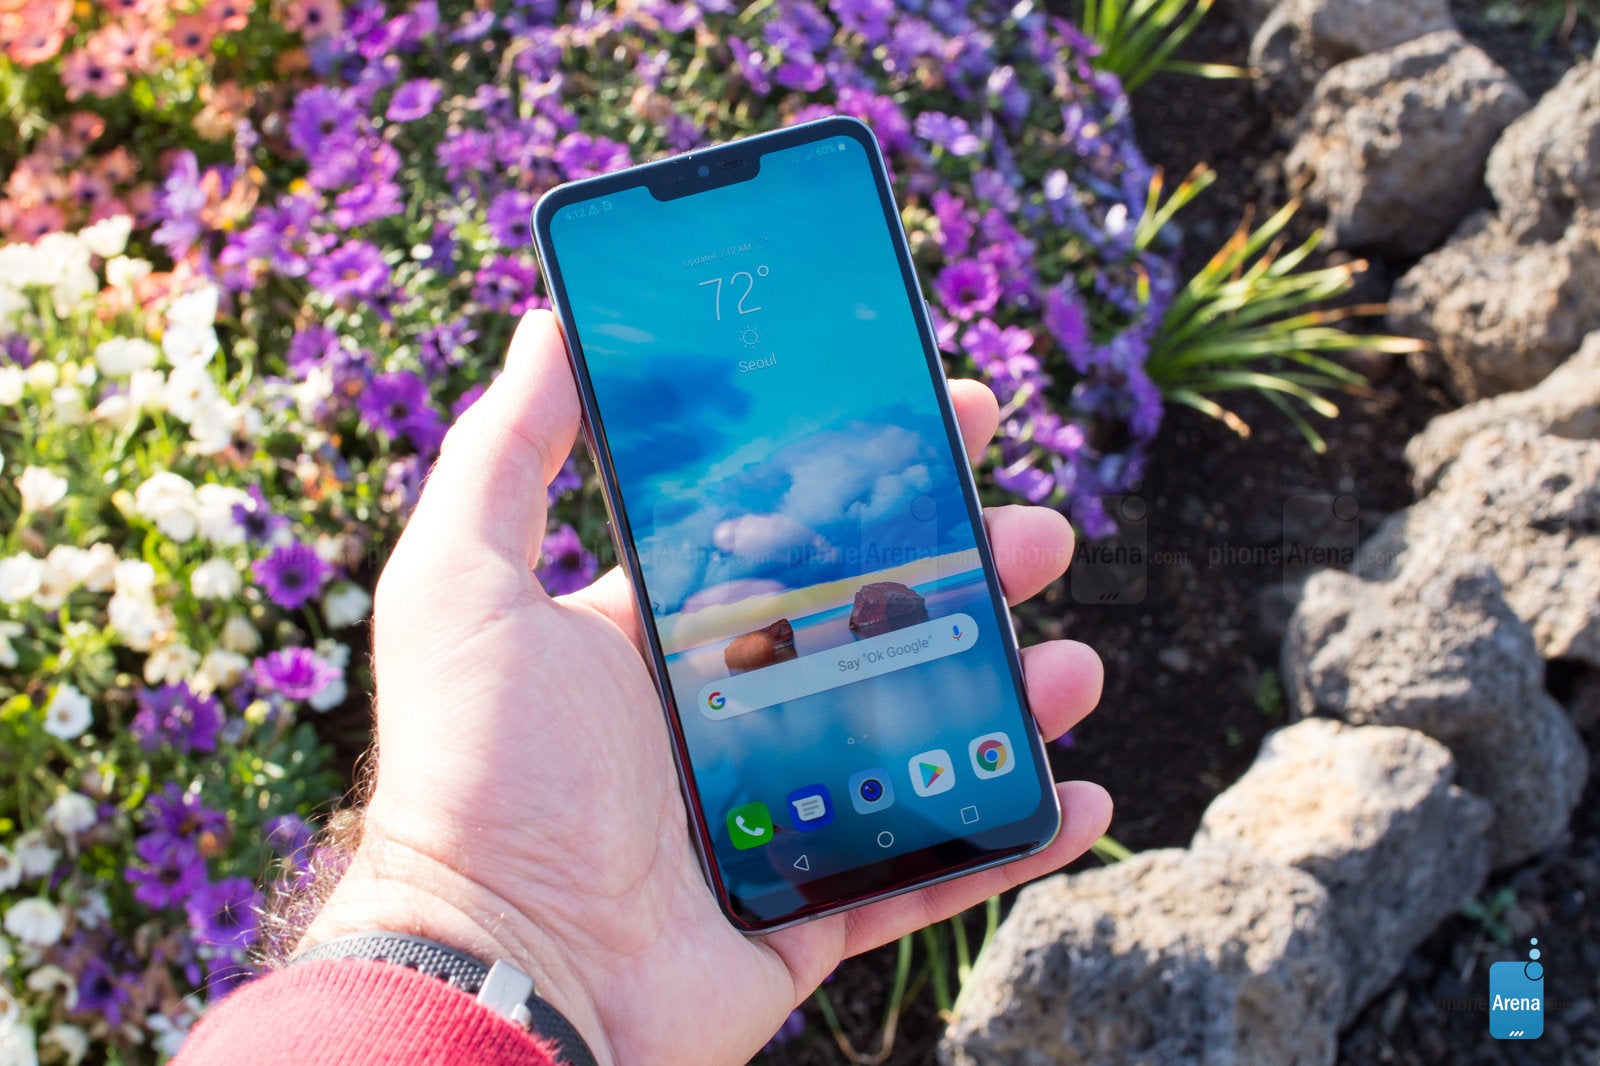 LG G7 ThinQ Preview: I spent two days with LG's best phone yet